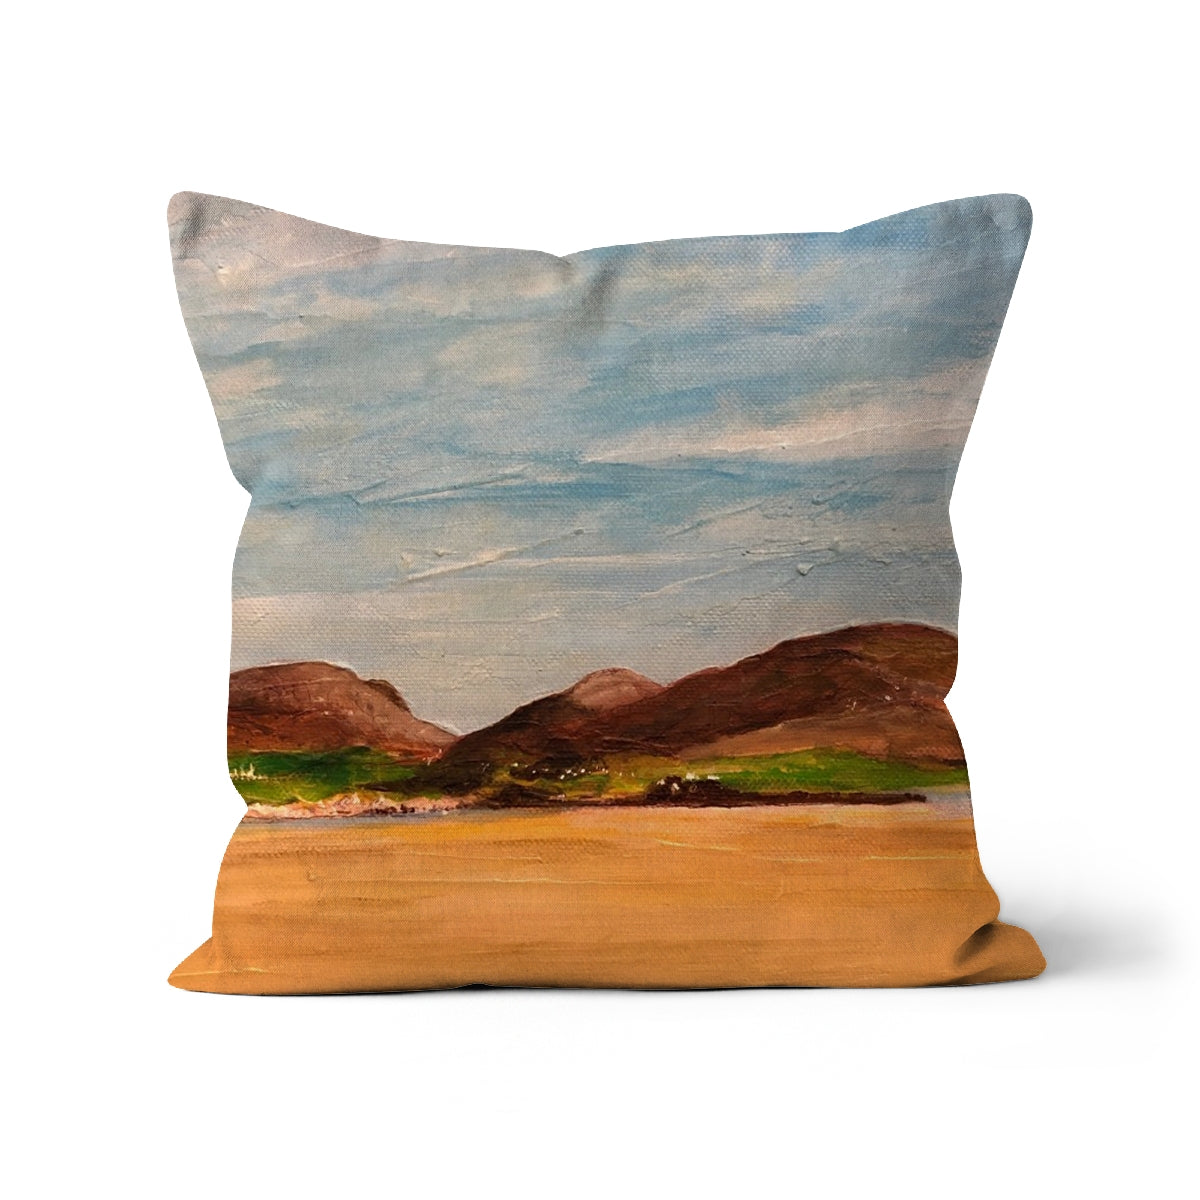 Uig Sands Lewis Art Gifts Cushion-Cushions-Hebridean Islands Art Gallery-Faux Suede-12"x12"-Paintings, Prints, Homeware, Art Gifts From Scotland By Scottish Artist Kevin Hunter